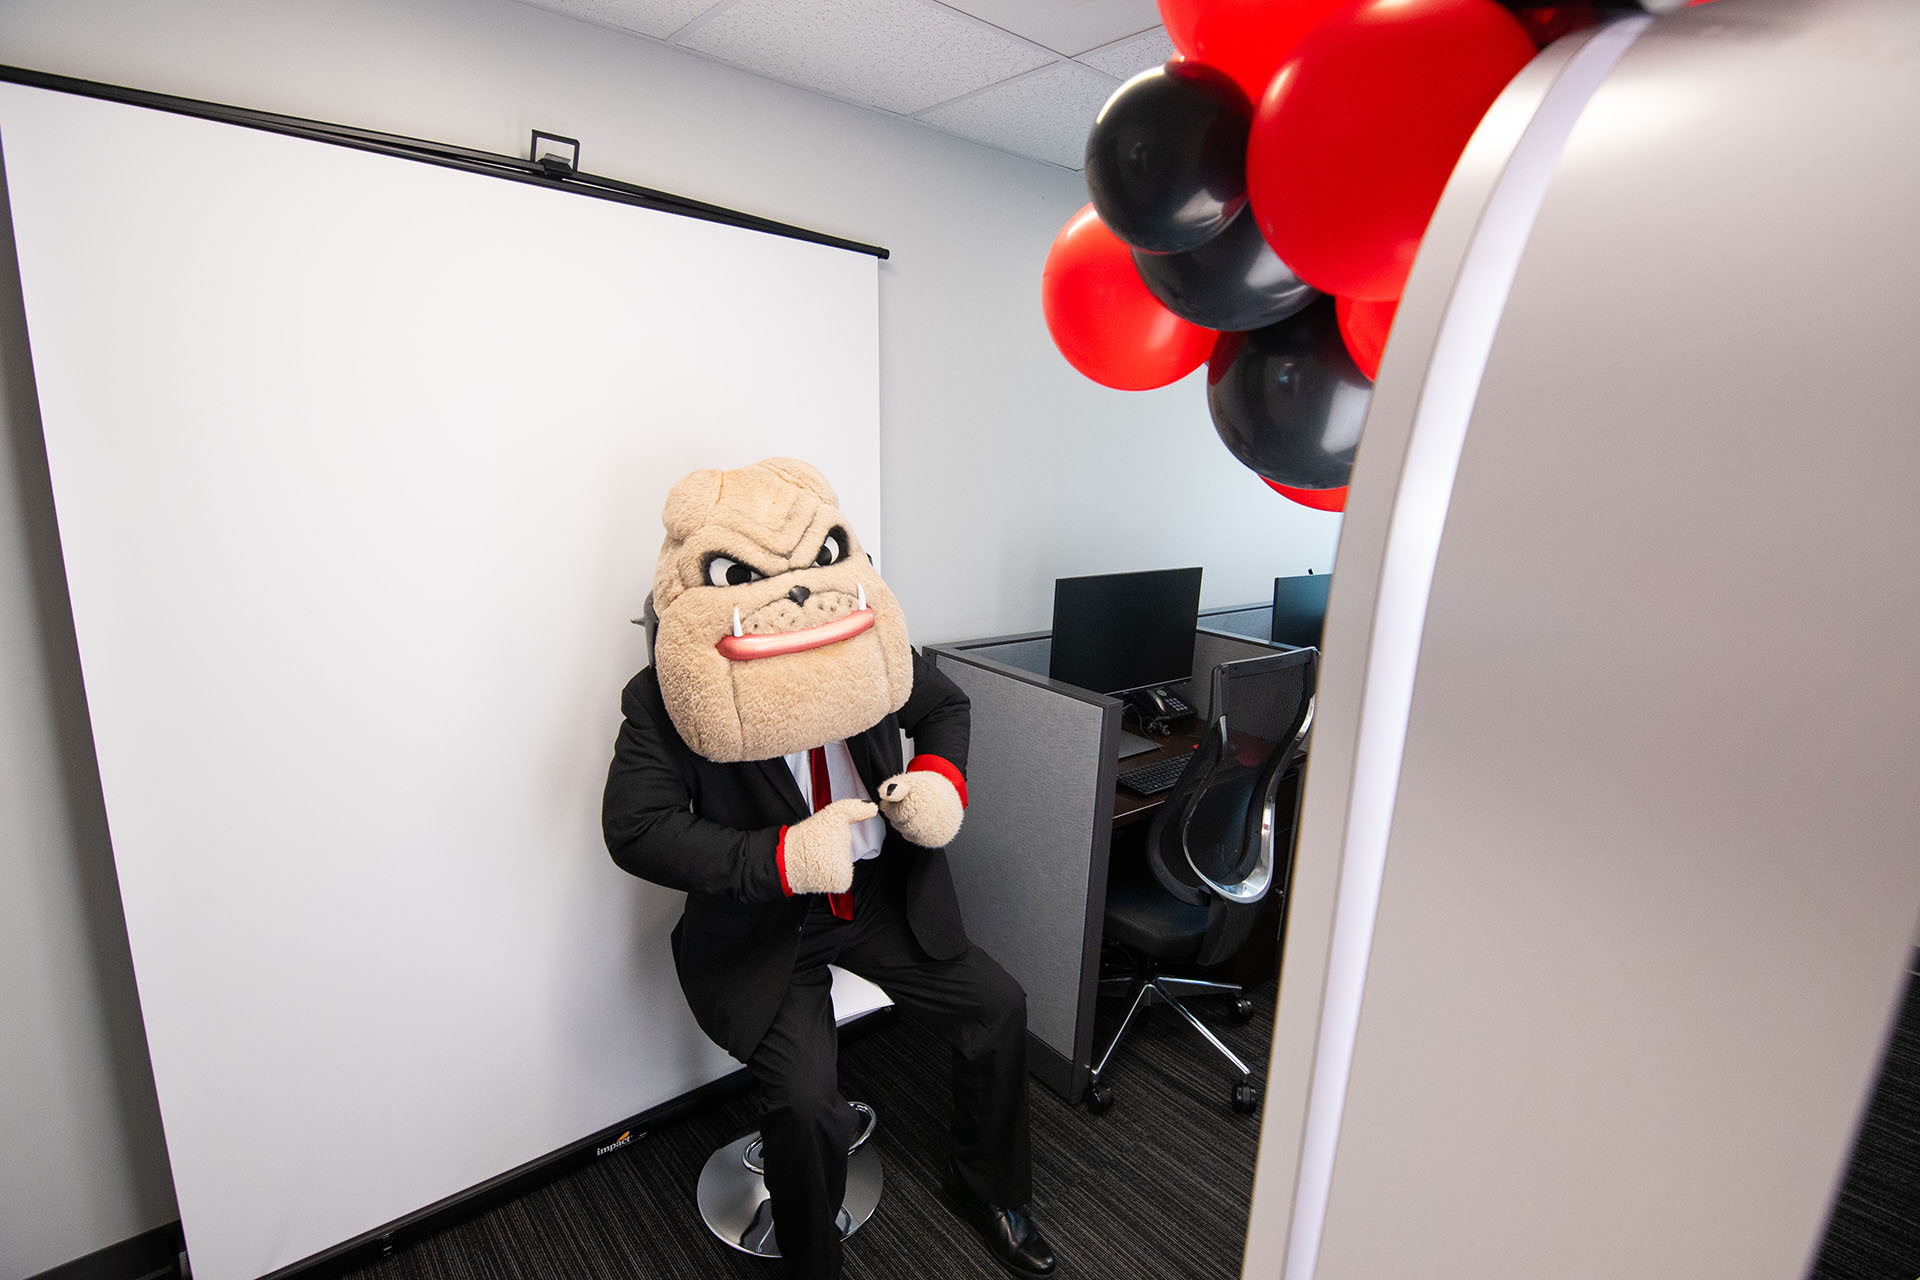 Hairy Dawg having his photo taken using the Career Center's new professional photo booth